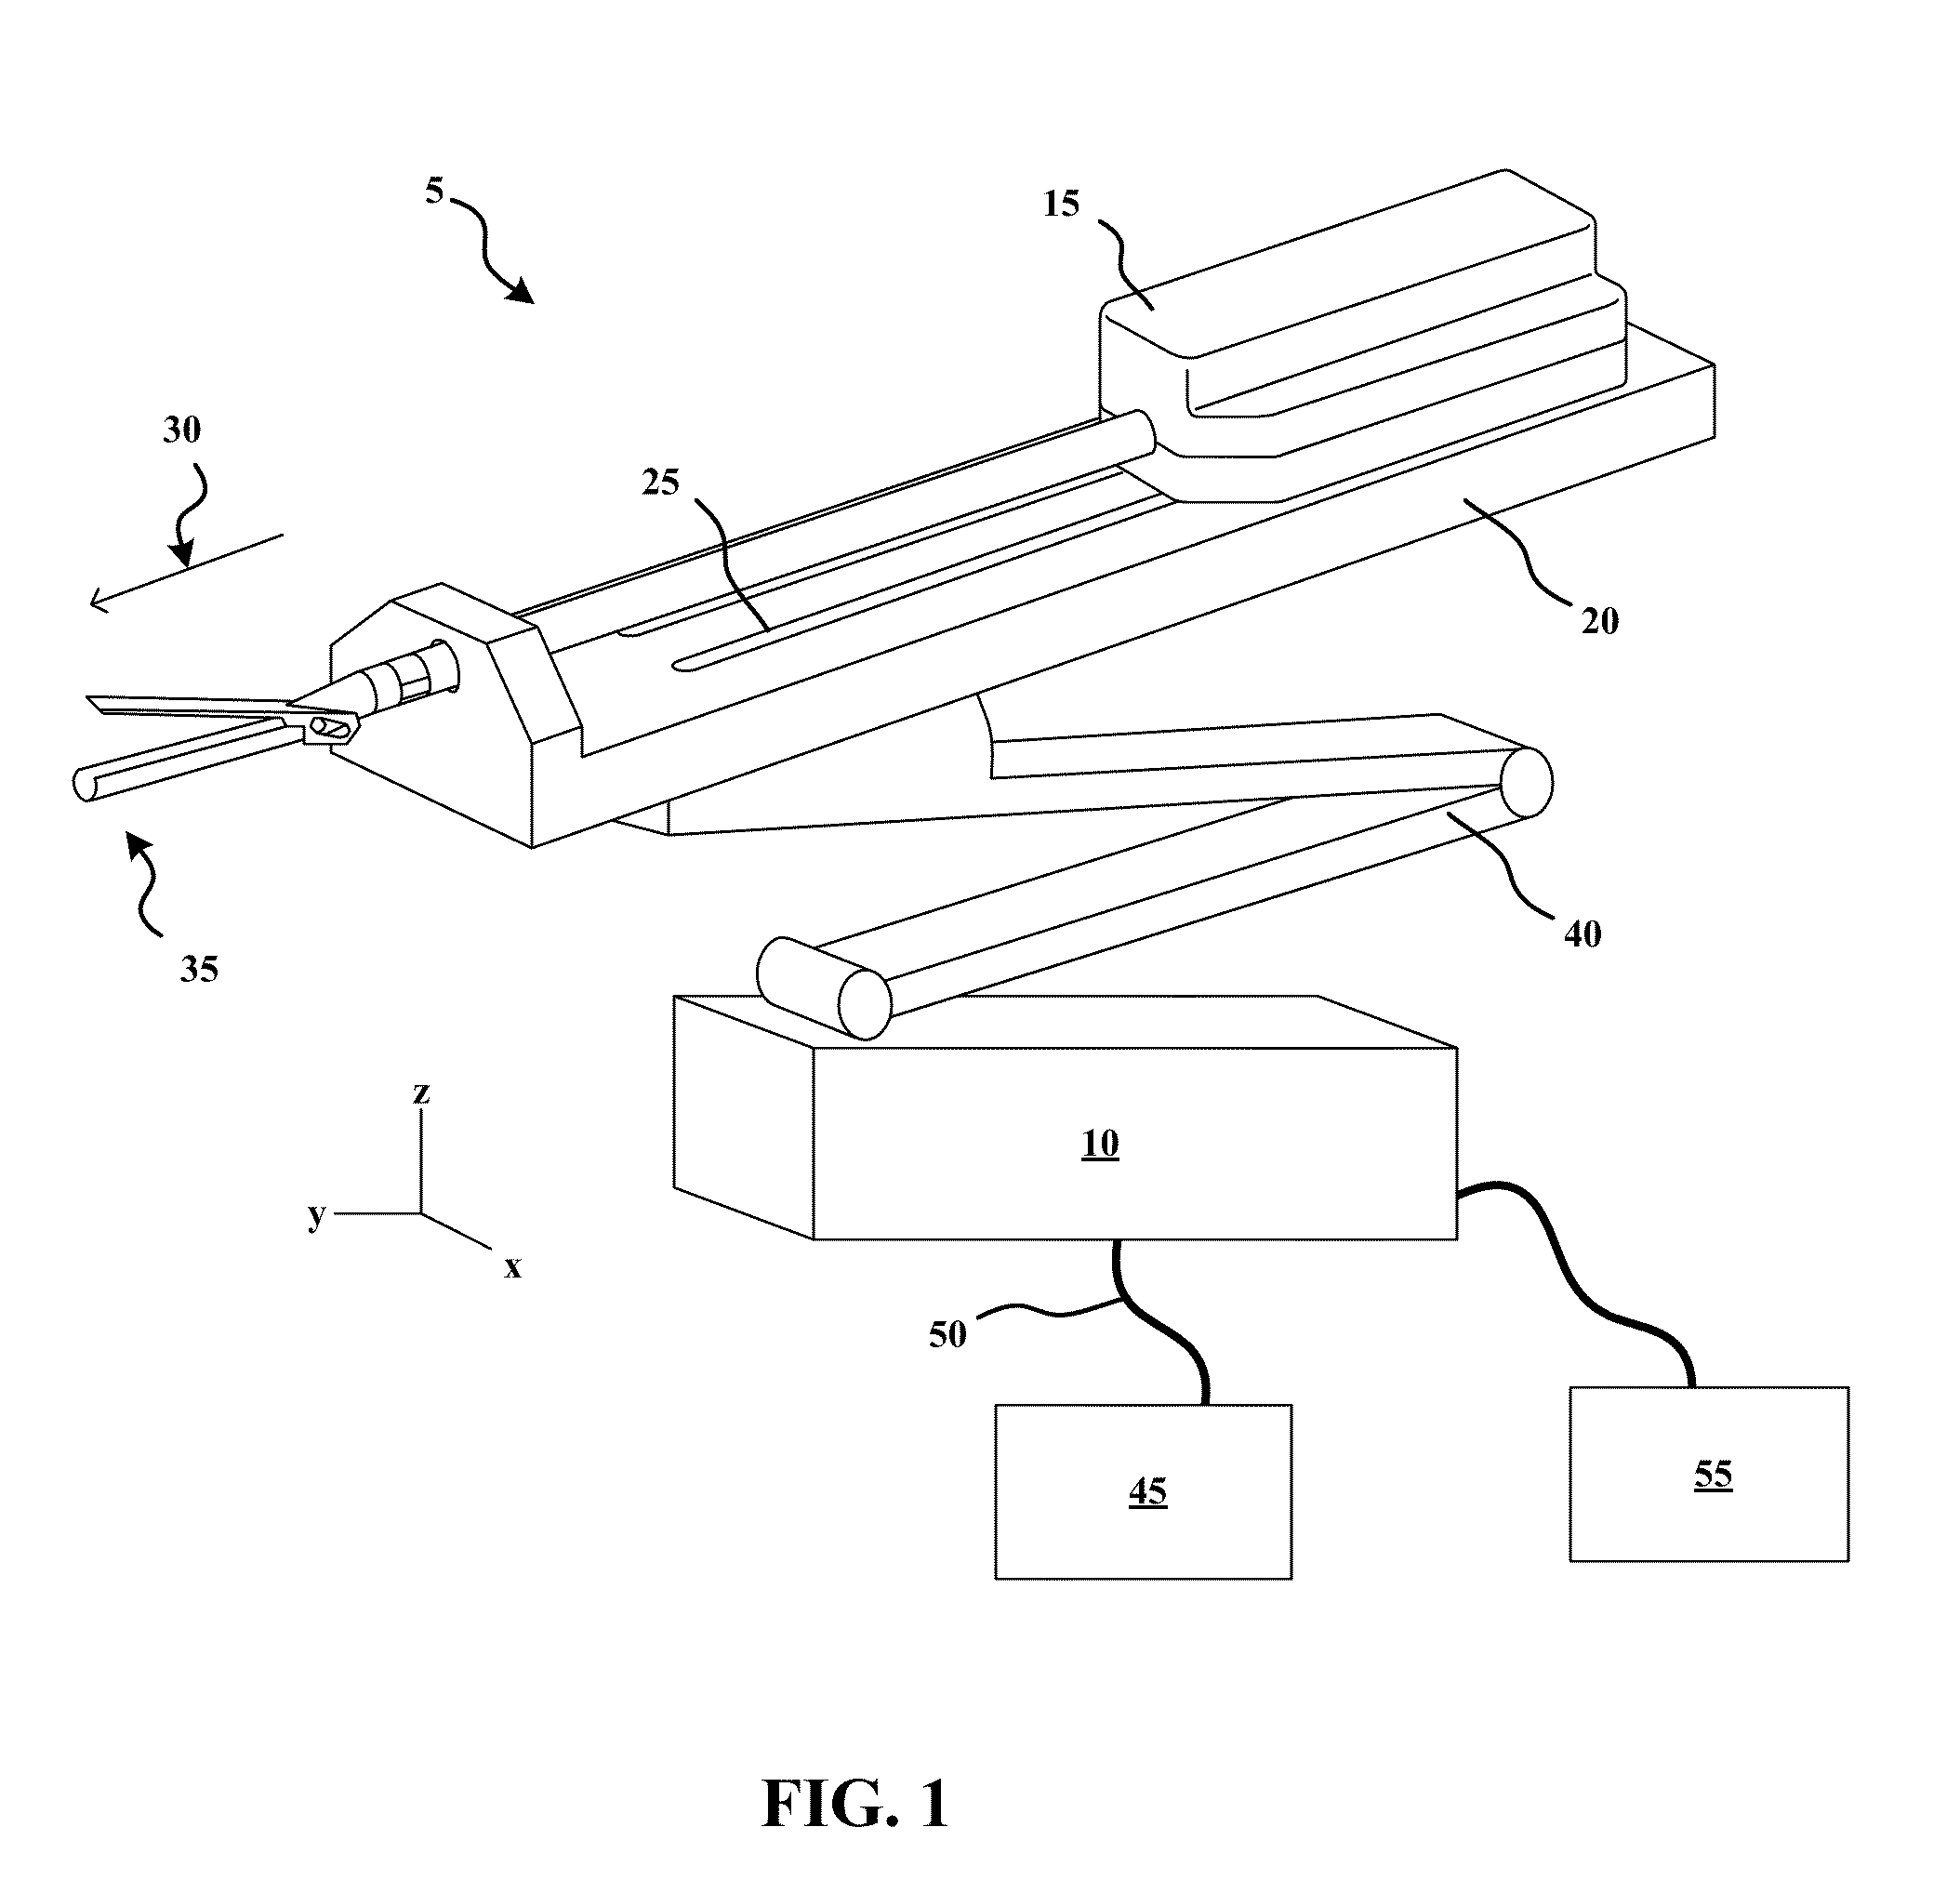 Surgical attachment for use with a robotic surgical system